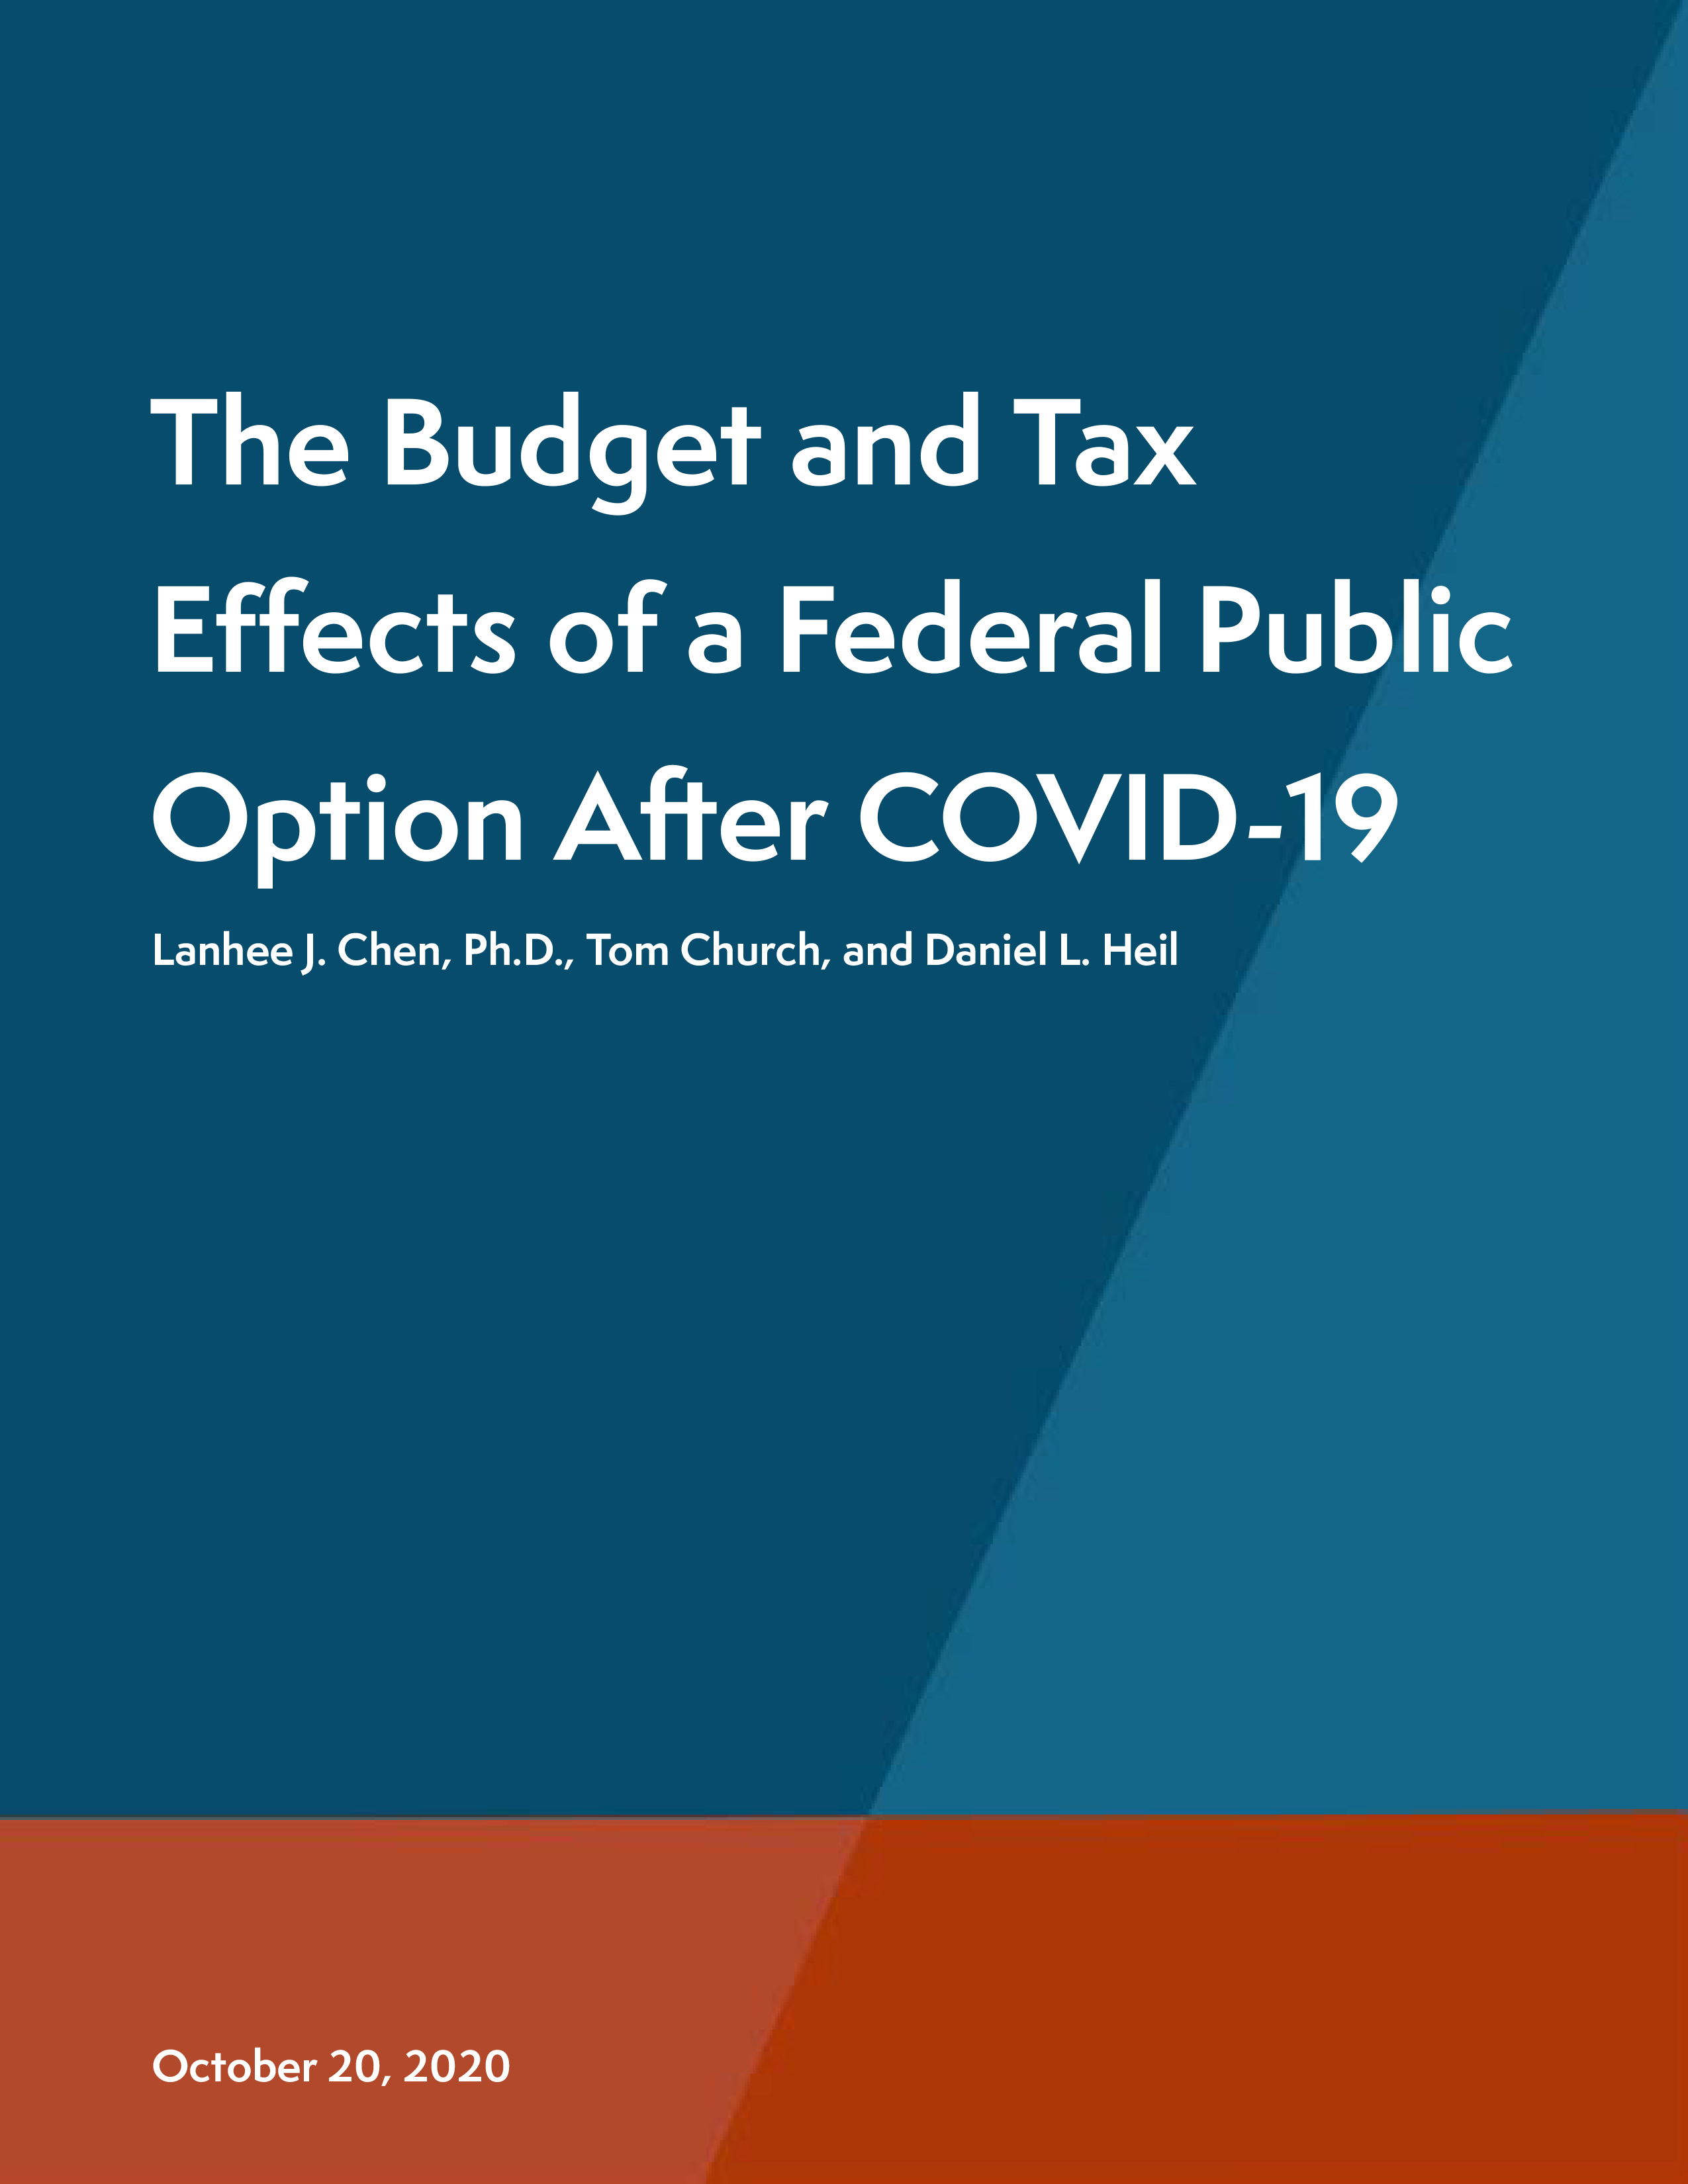 study-the-budget-and-tax-effects-of-a-federal-public-option-after-covid-19-1.jpg